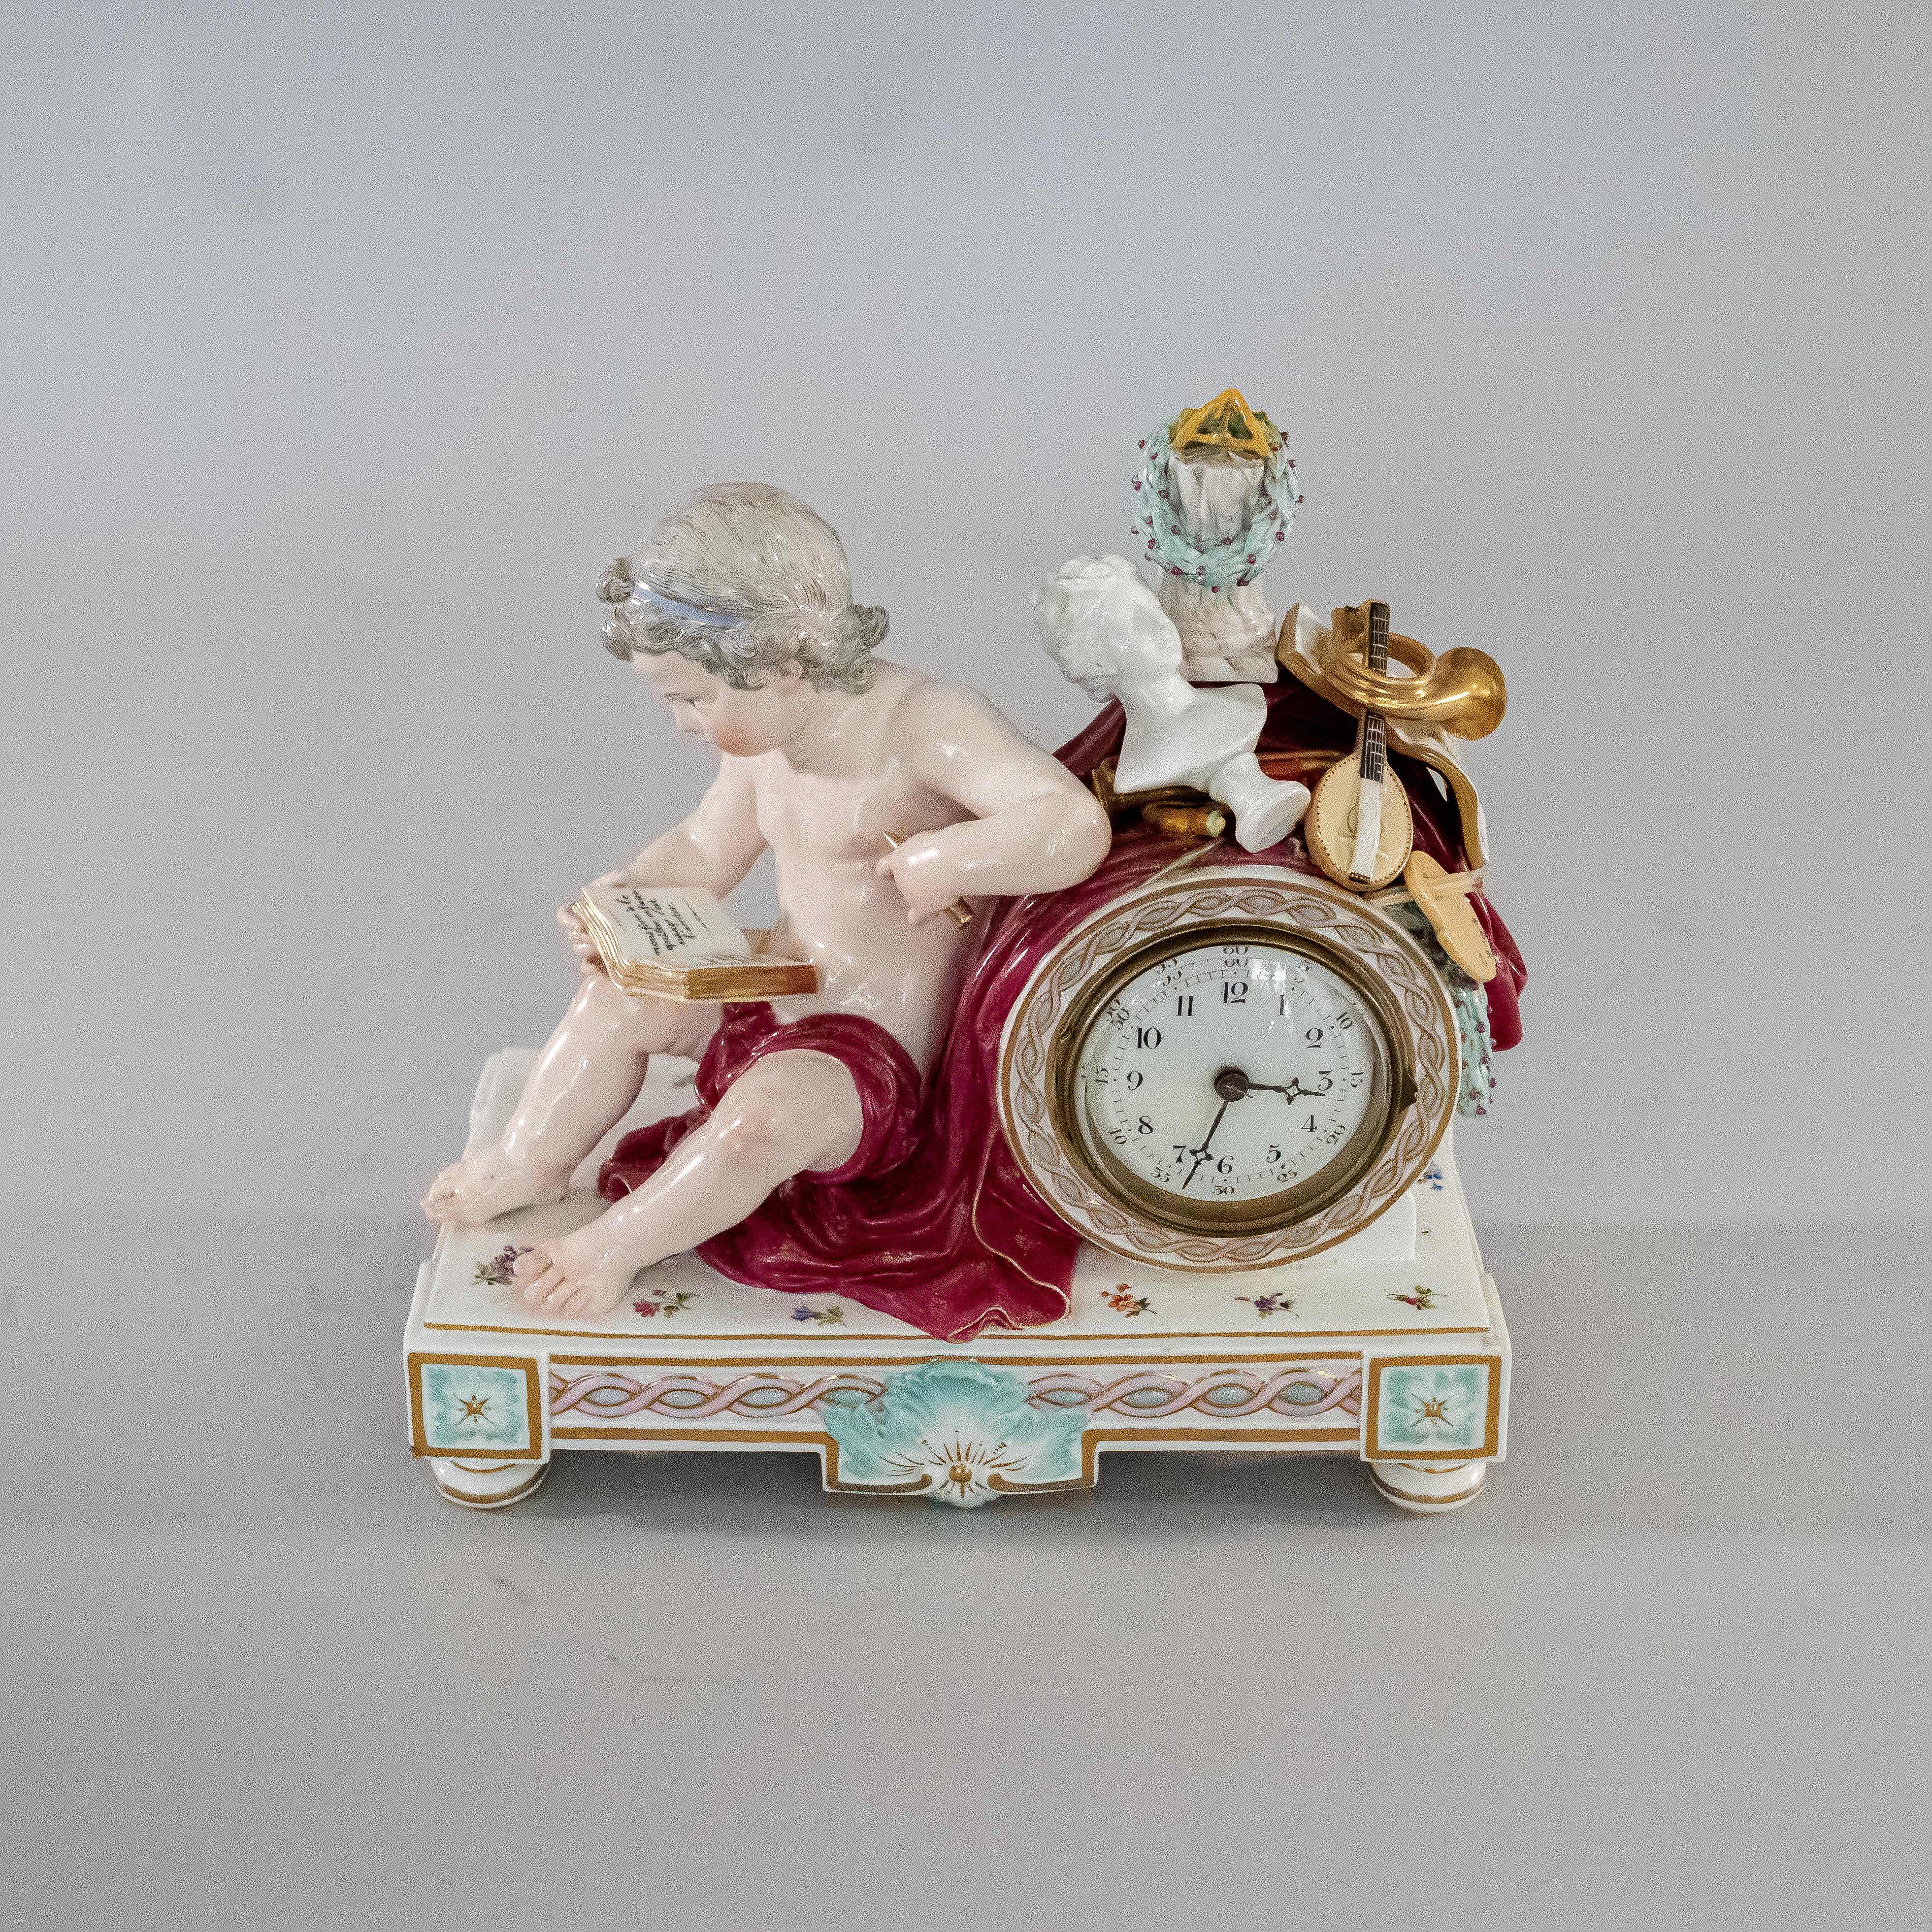 19th century German Meissen Porcelain figural mantle clock. Seated figure of a nude Putti reading a book with his left arm resting on the clock tower, the tower is topped with a robe, instruments and artworks representing industry & the arts, at the